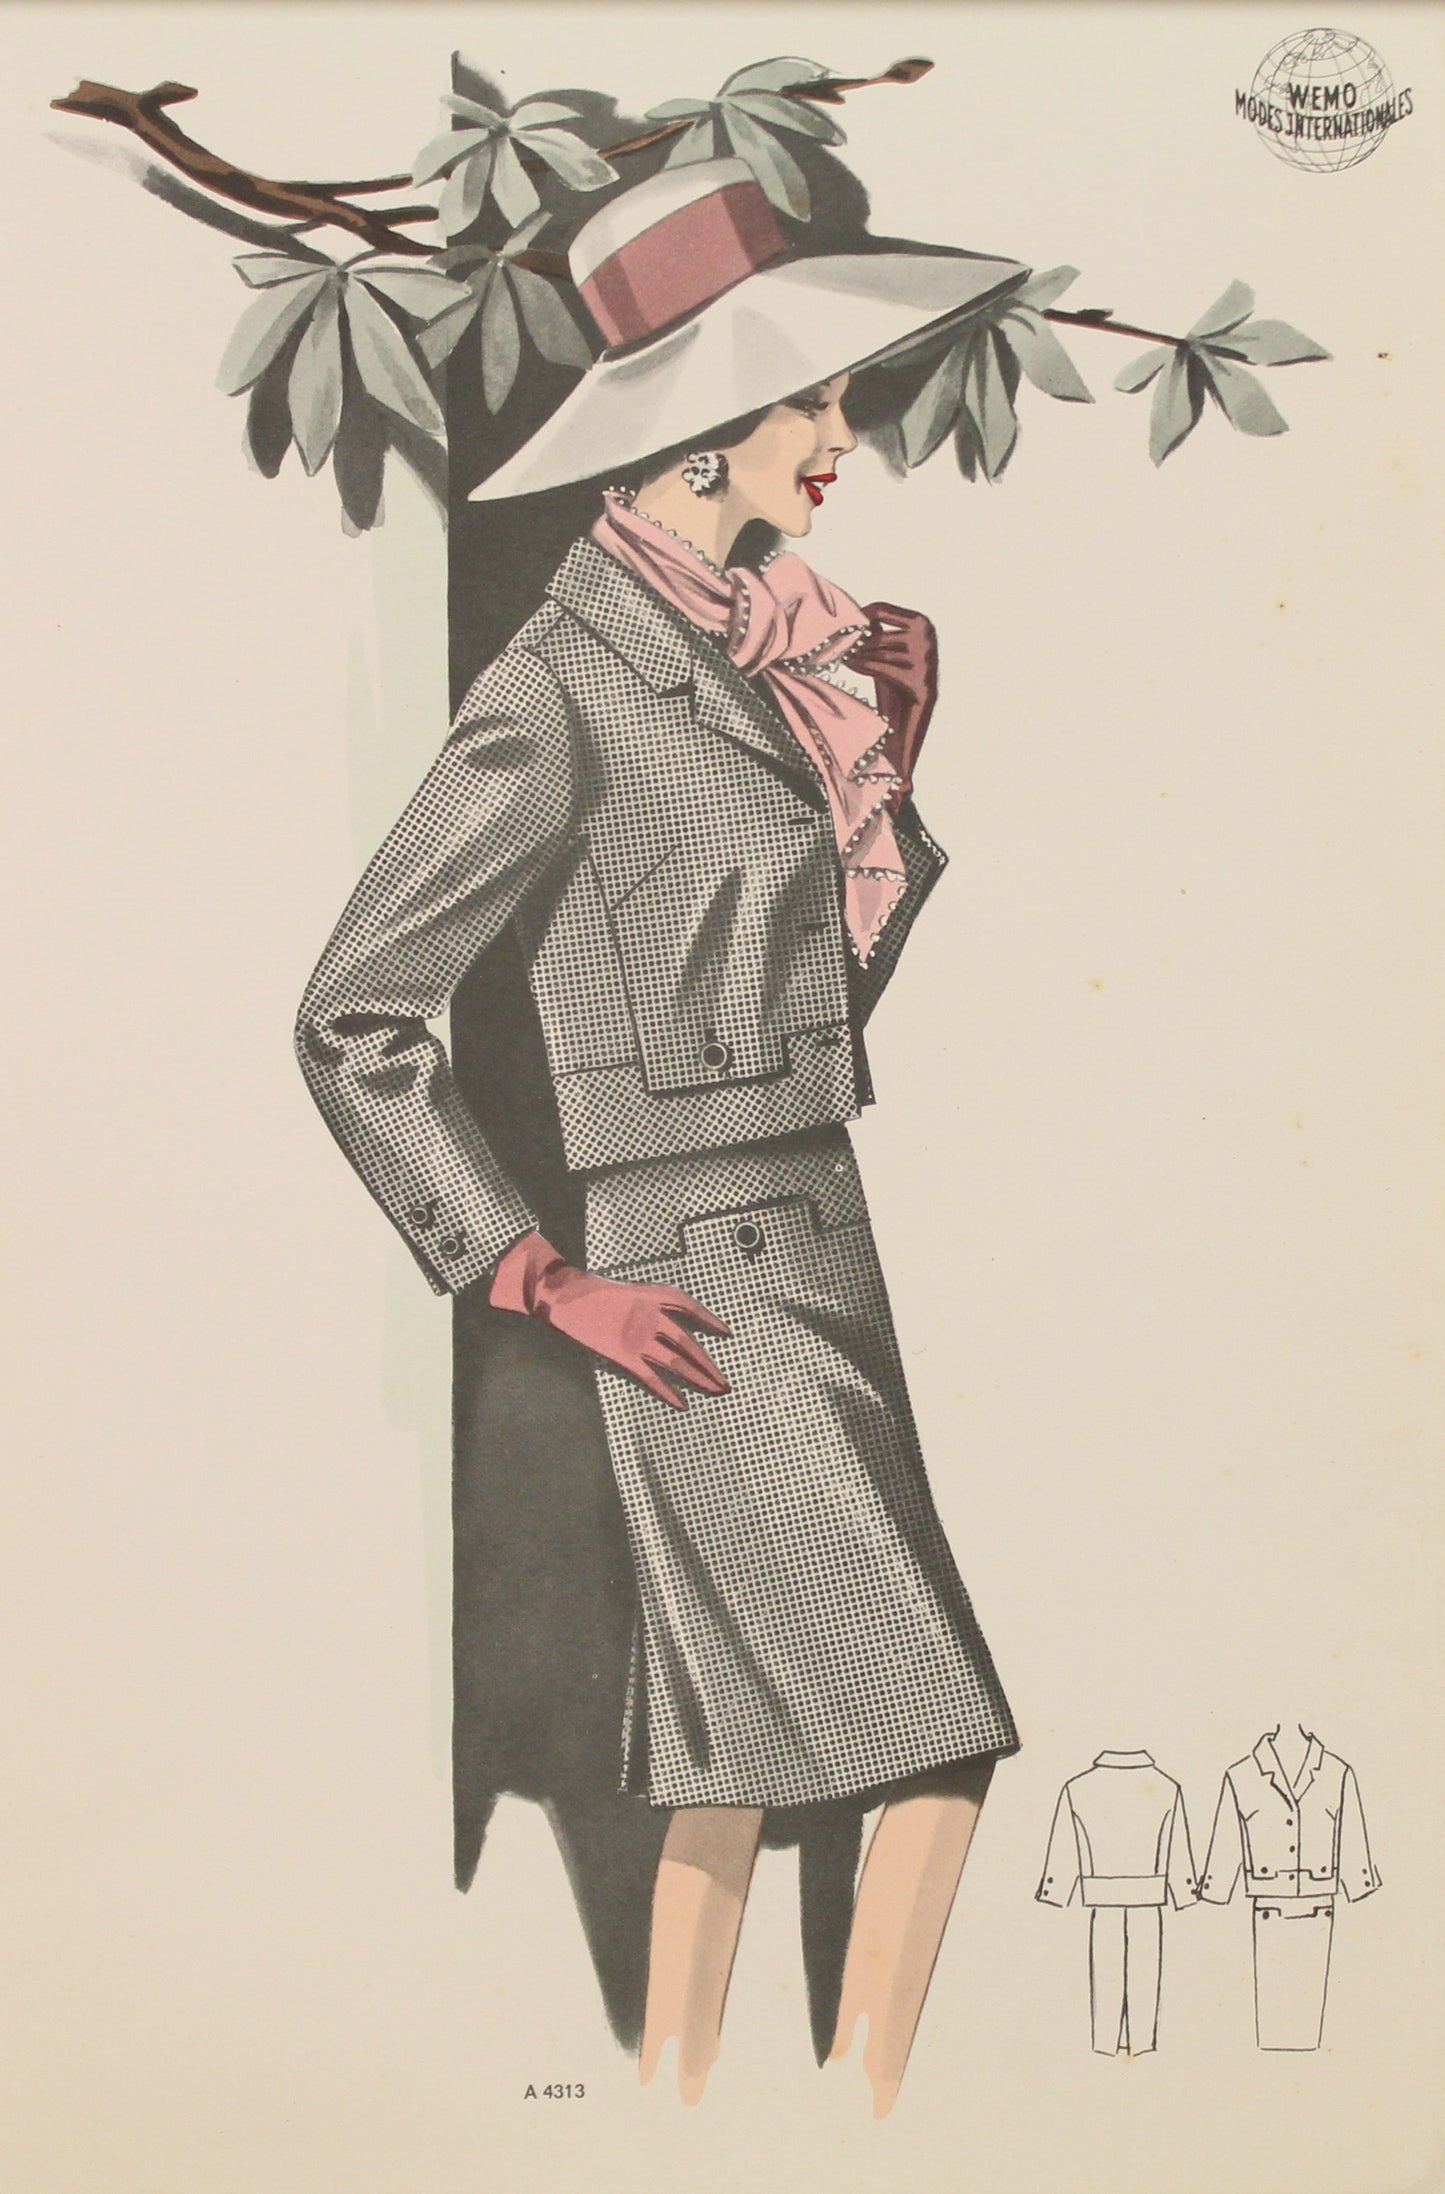 Fashion of the 60s, New Lines from the Fashions in Vienna, Mode Studio, A4313, 1965